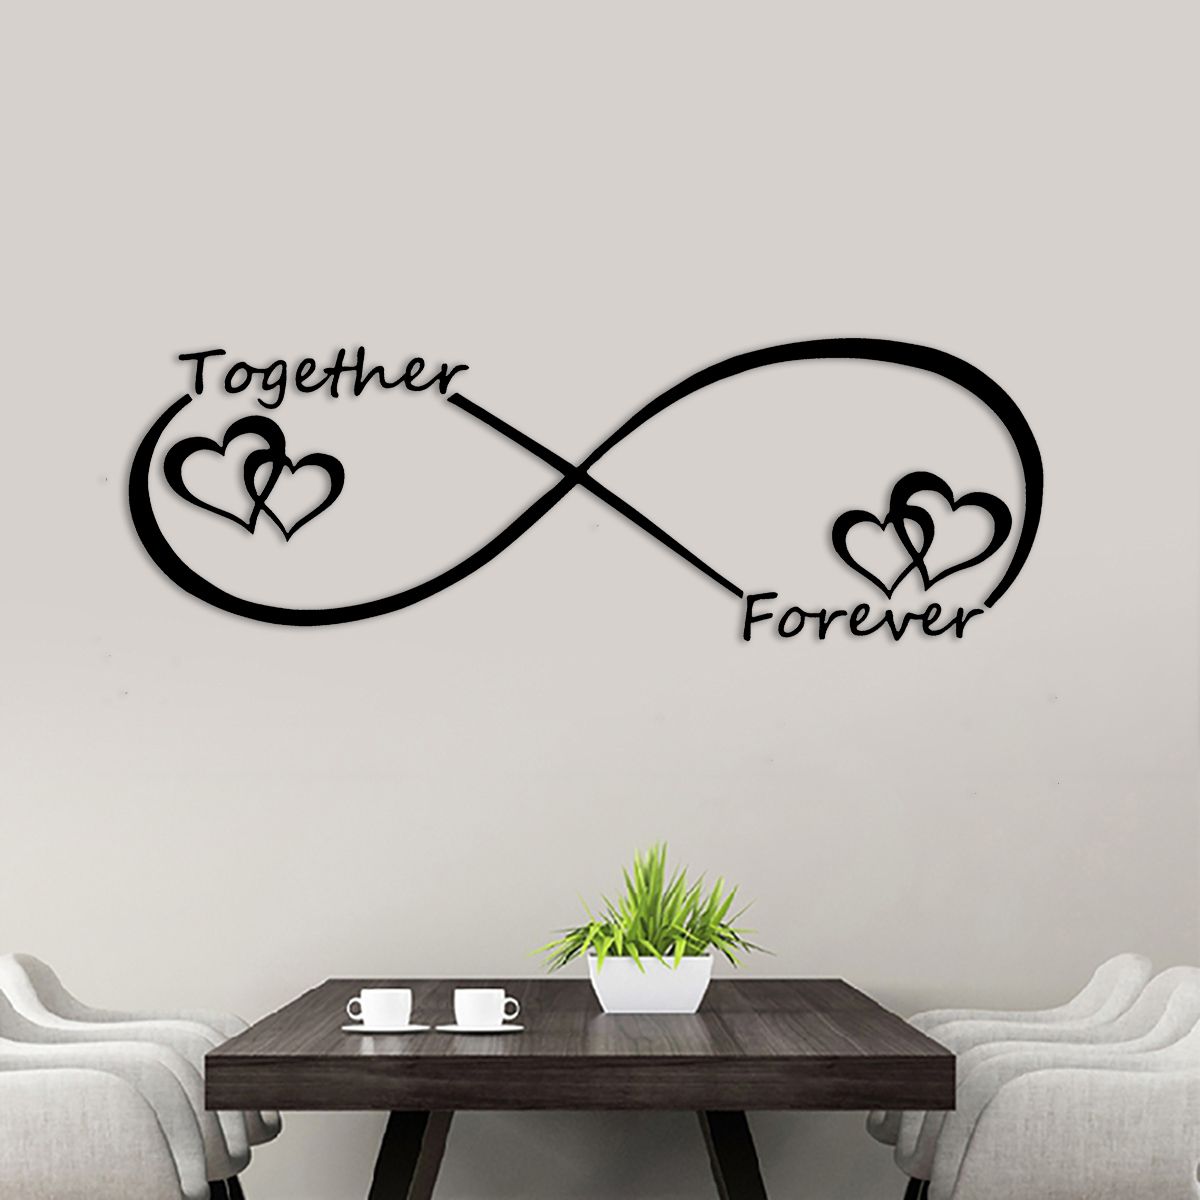 Removable-Quote-Art-Decor-Vinyl-Wall-Sticker-PVC-Mural-DIY-Home-Room-Decorations-1540053